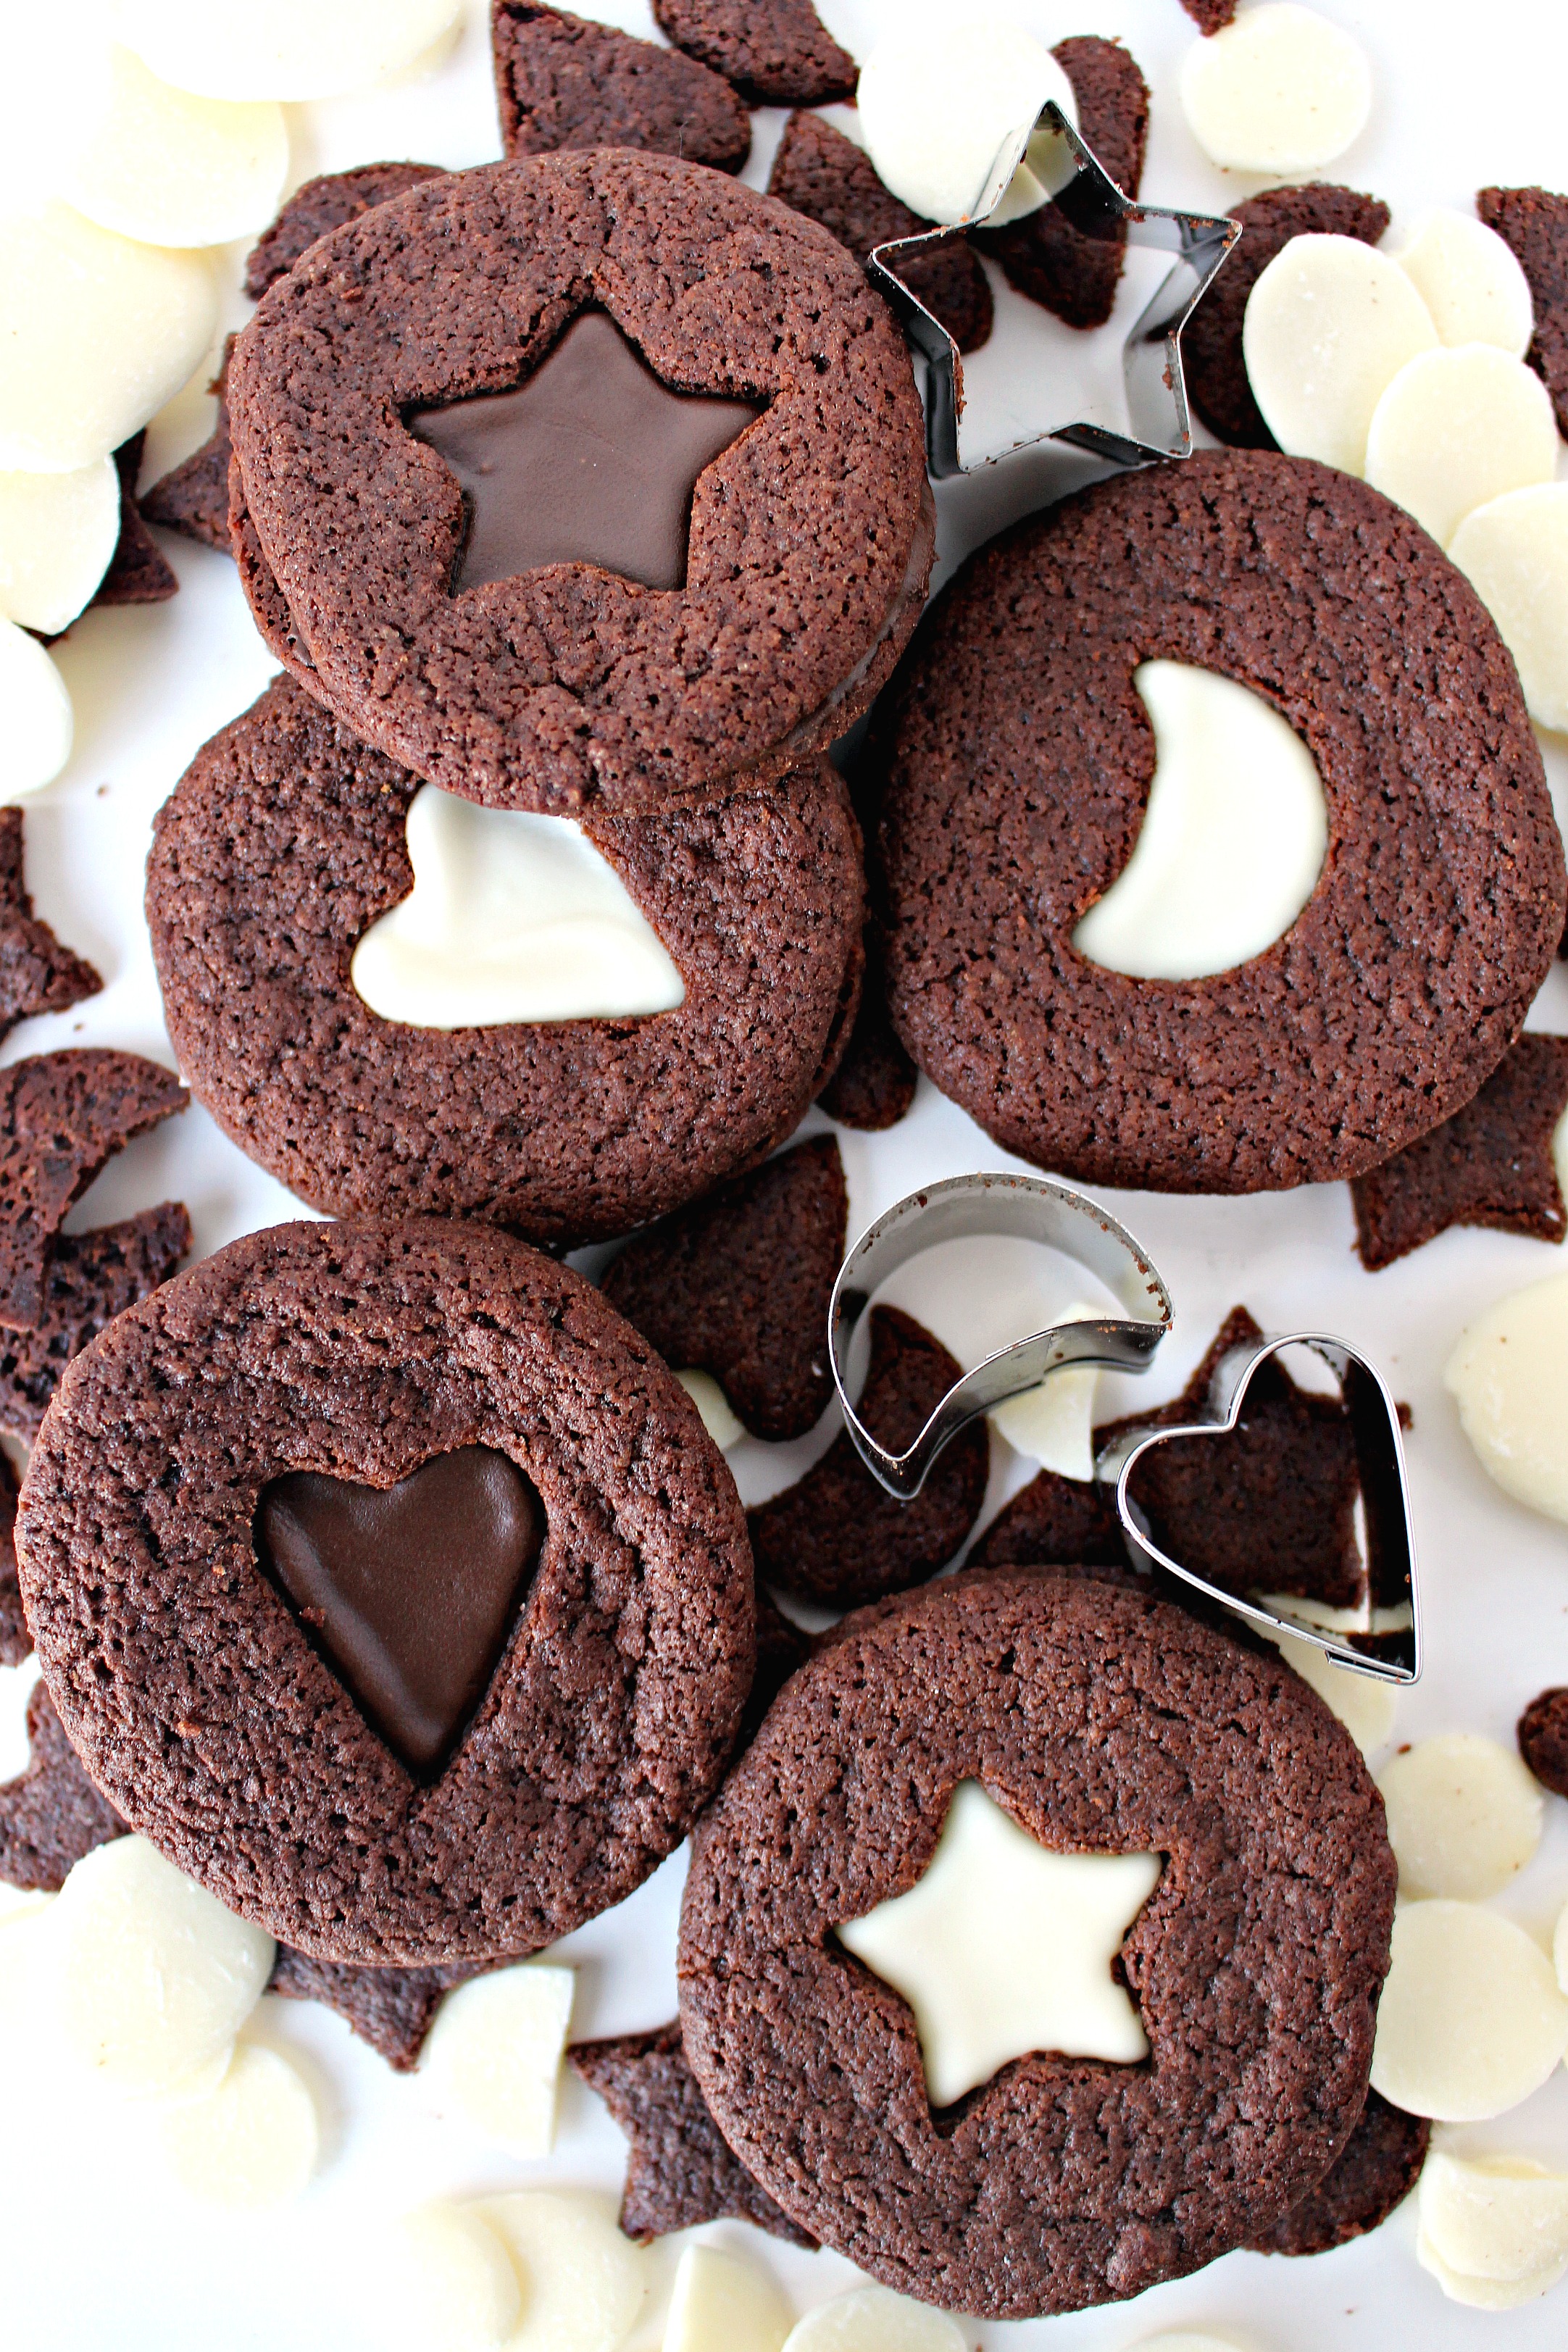  Chocolate Sandwich Cookies with star, heart, and moon cutout centers showing white or dark chocolate filling.